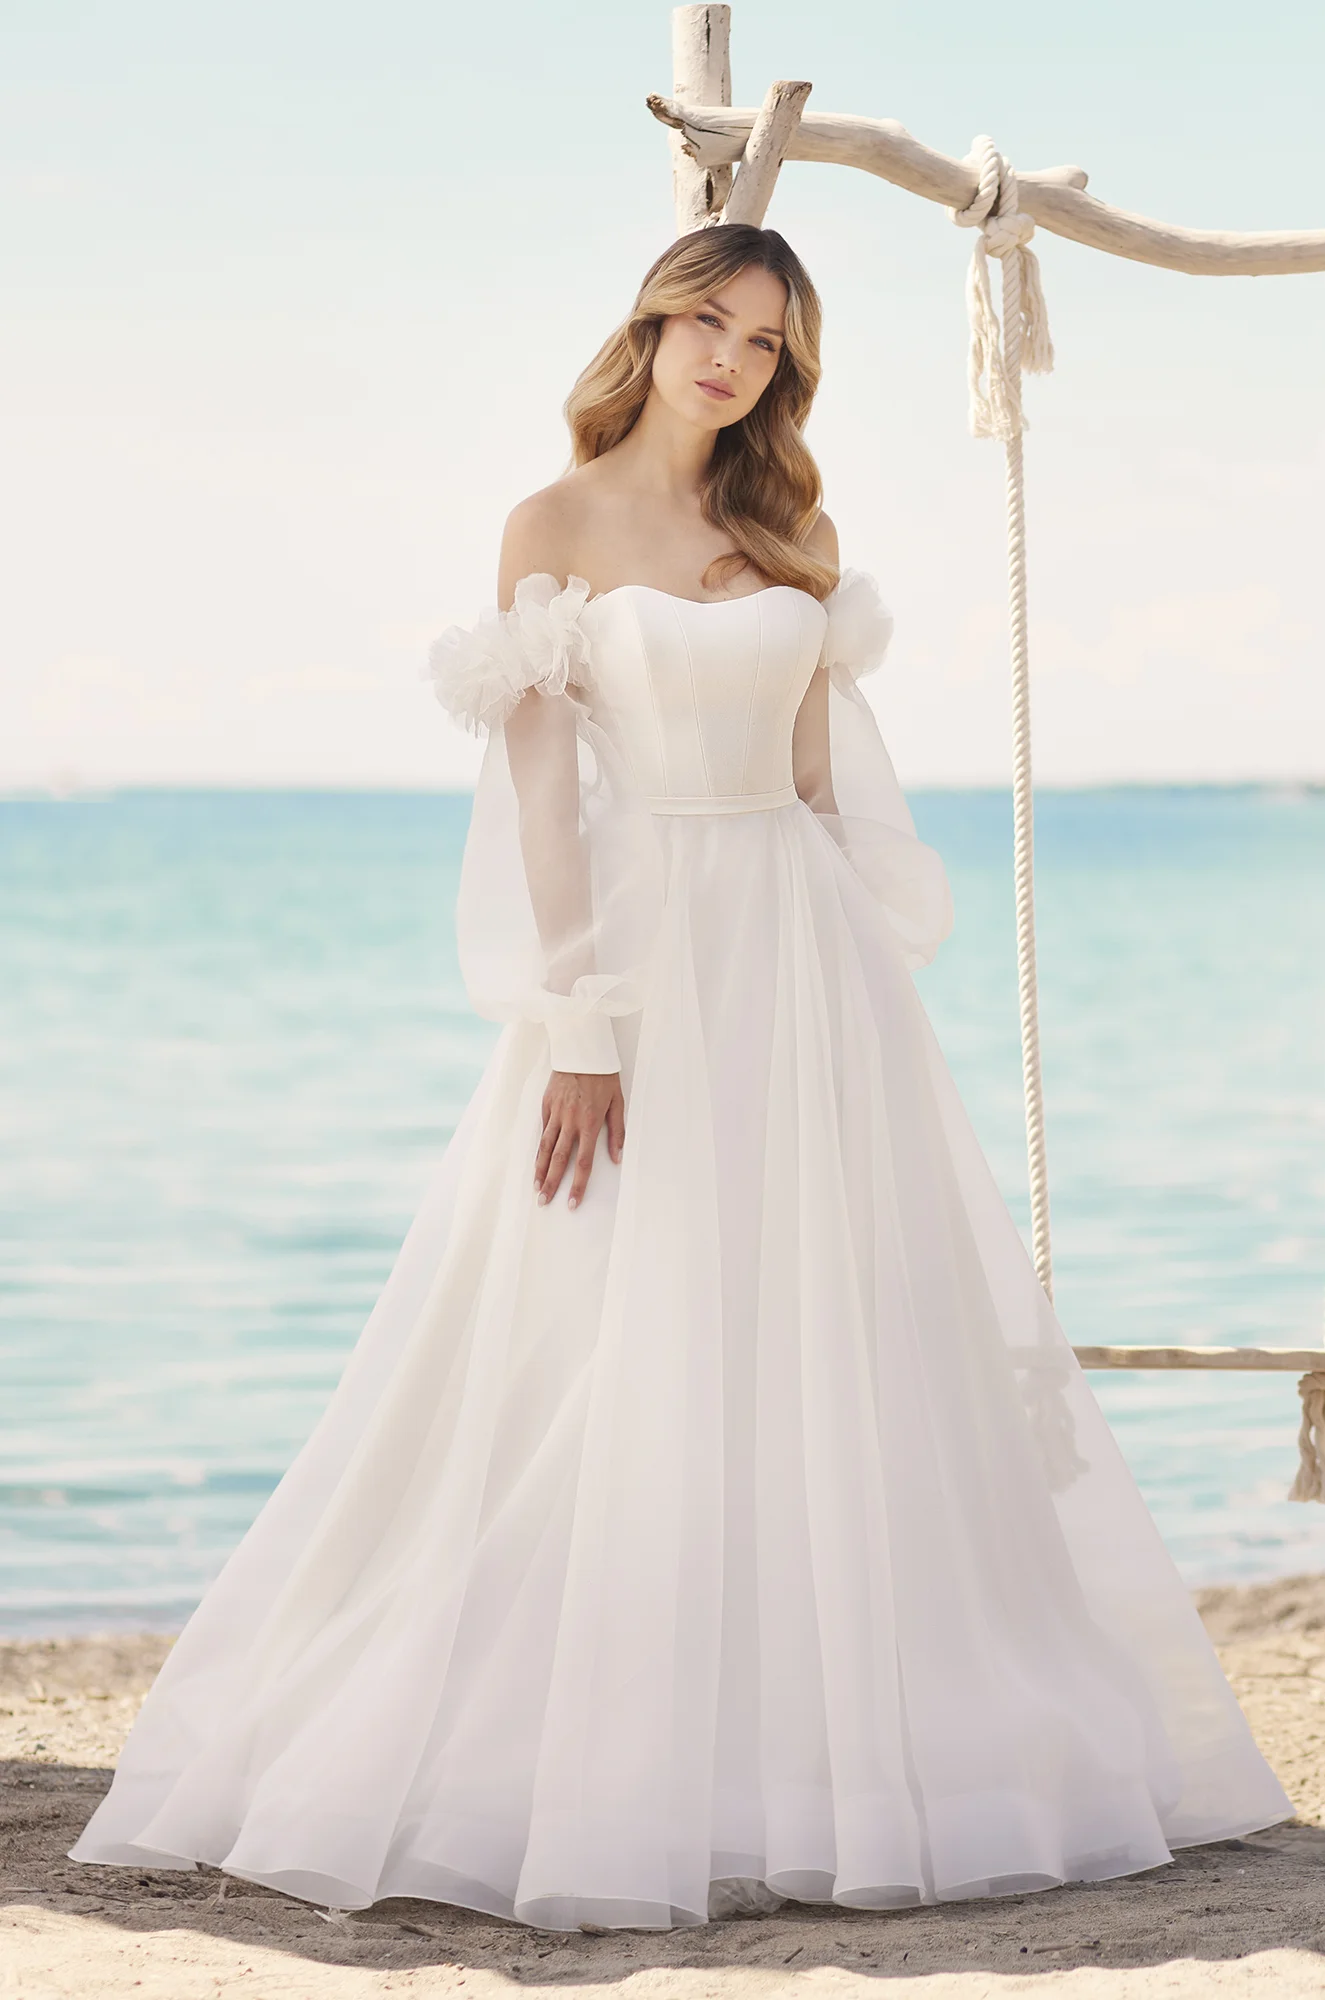 The front of style M2480 by wedding dress designer mikaella bridal